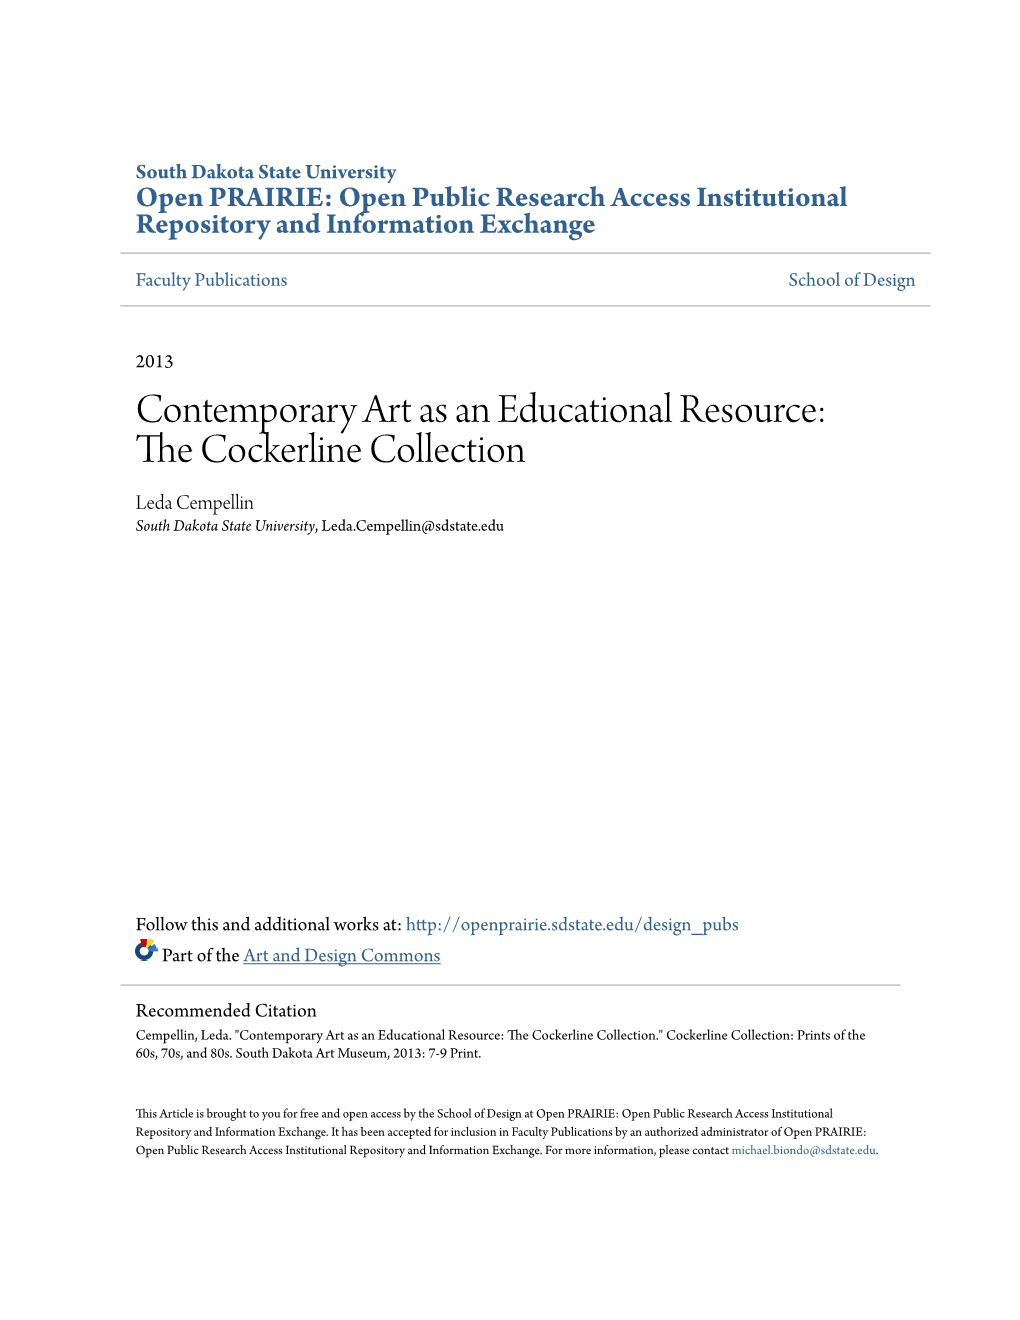 Contemporary Art As an Educational Resource: the Cockerline Collection